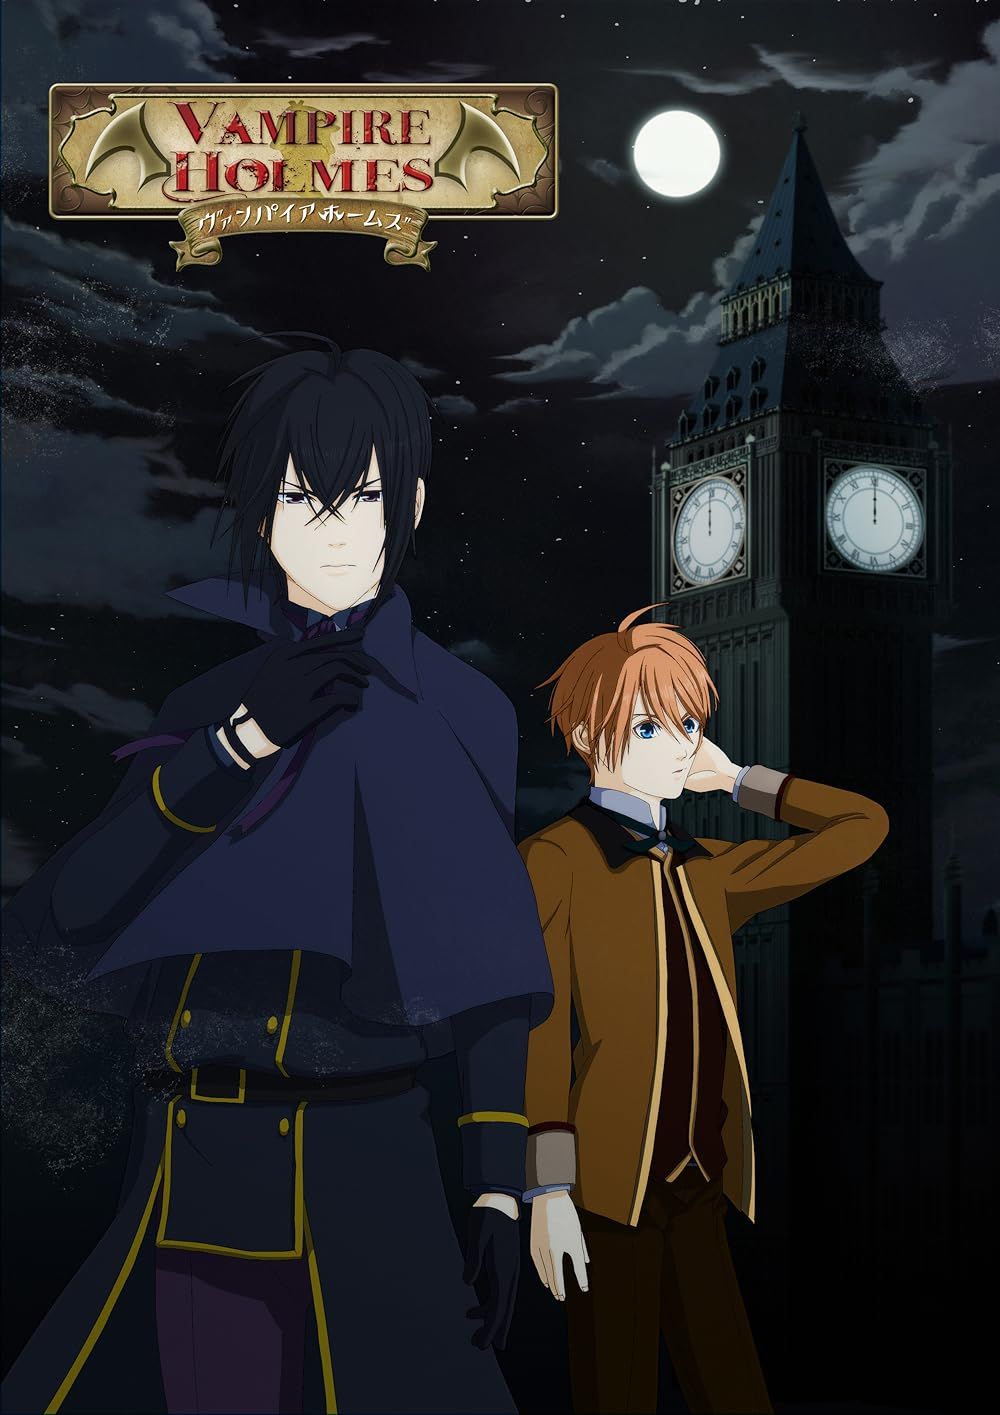 Holmes and Hudson in the Vampire Holmes anime poster